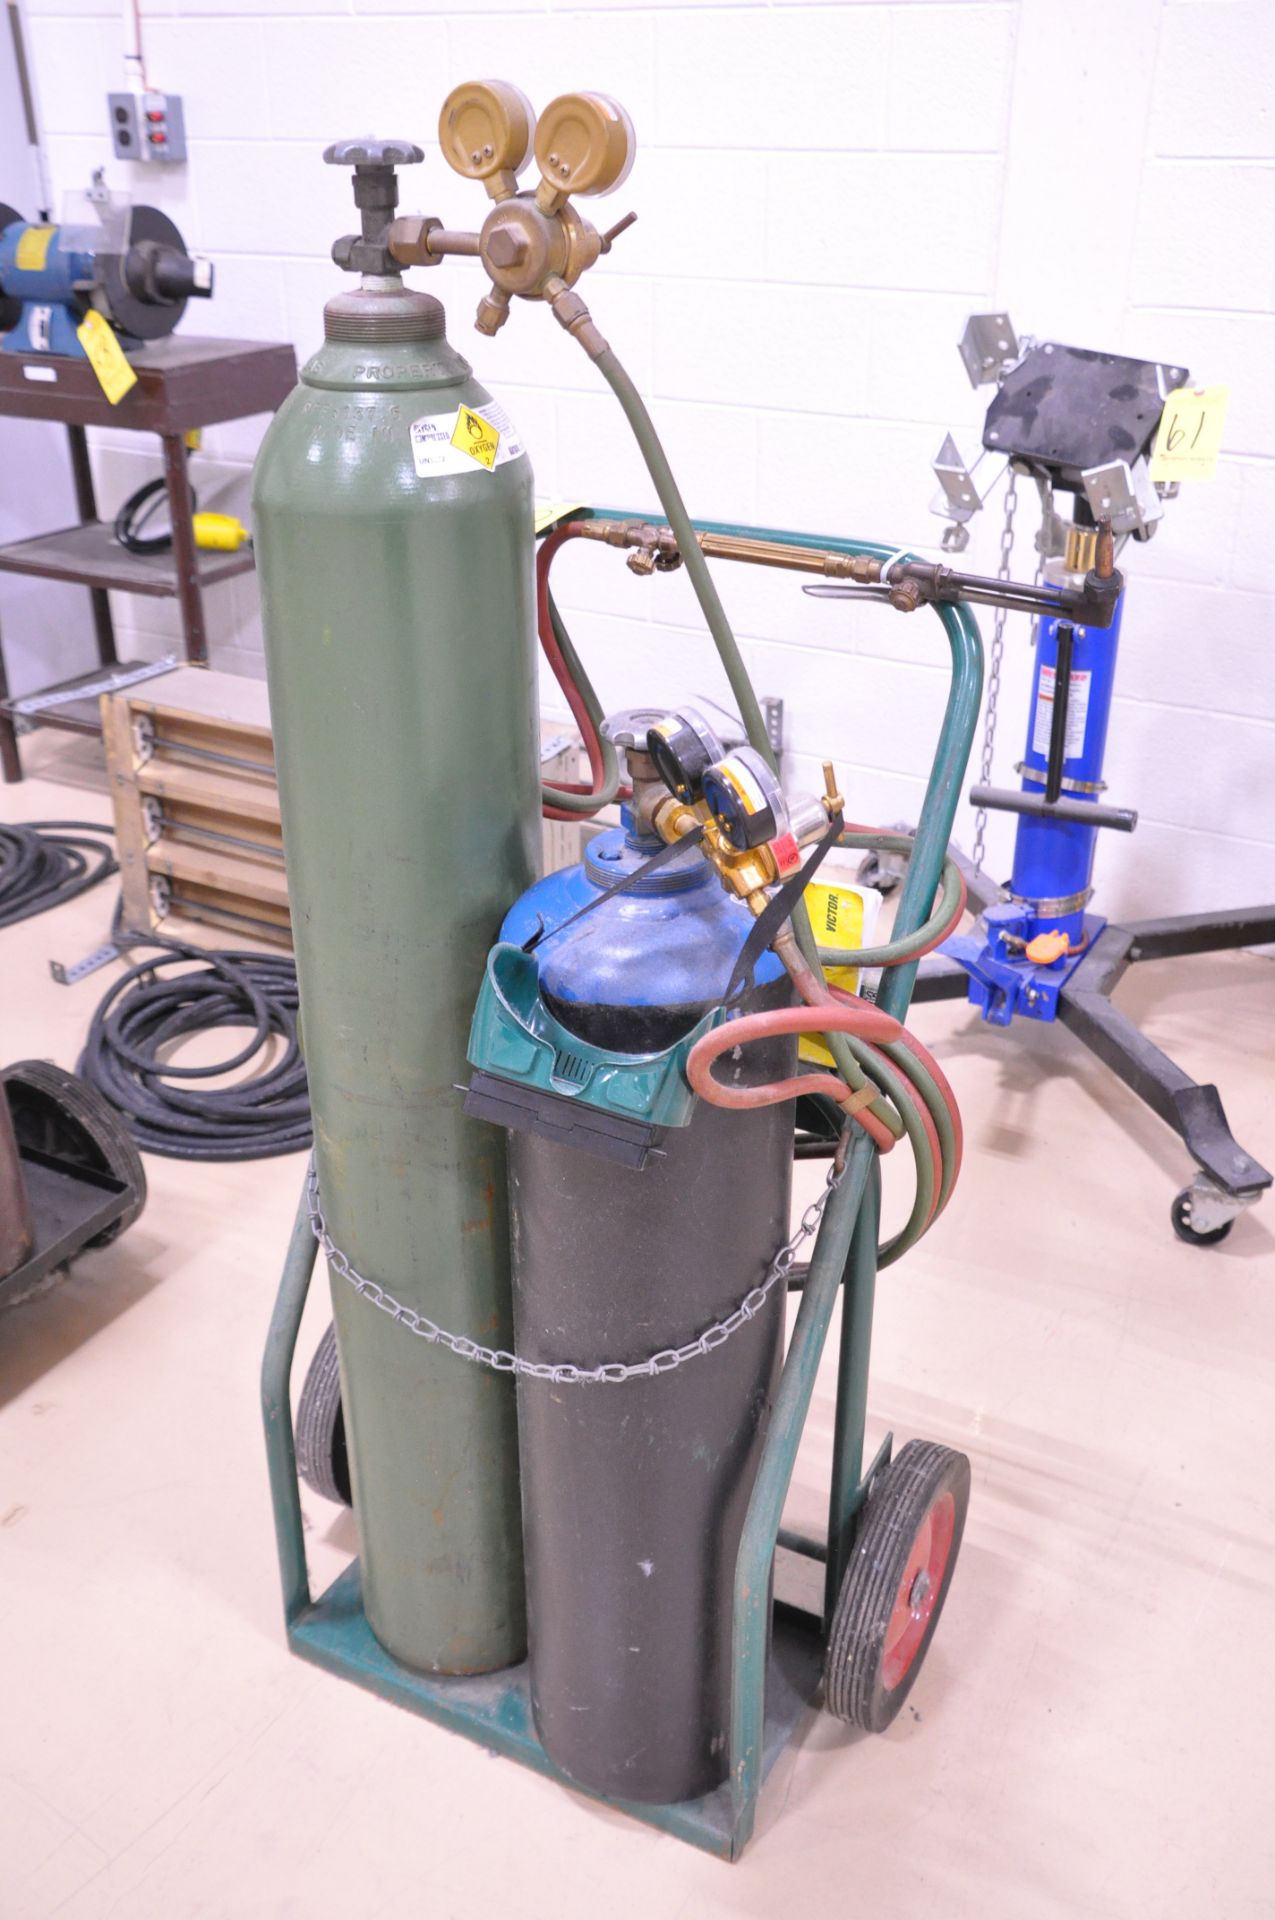 Oxygen/Acetylene Cart with Torch, Hose, Gages, Goggles, and Tanks